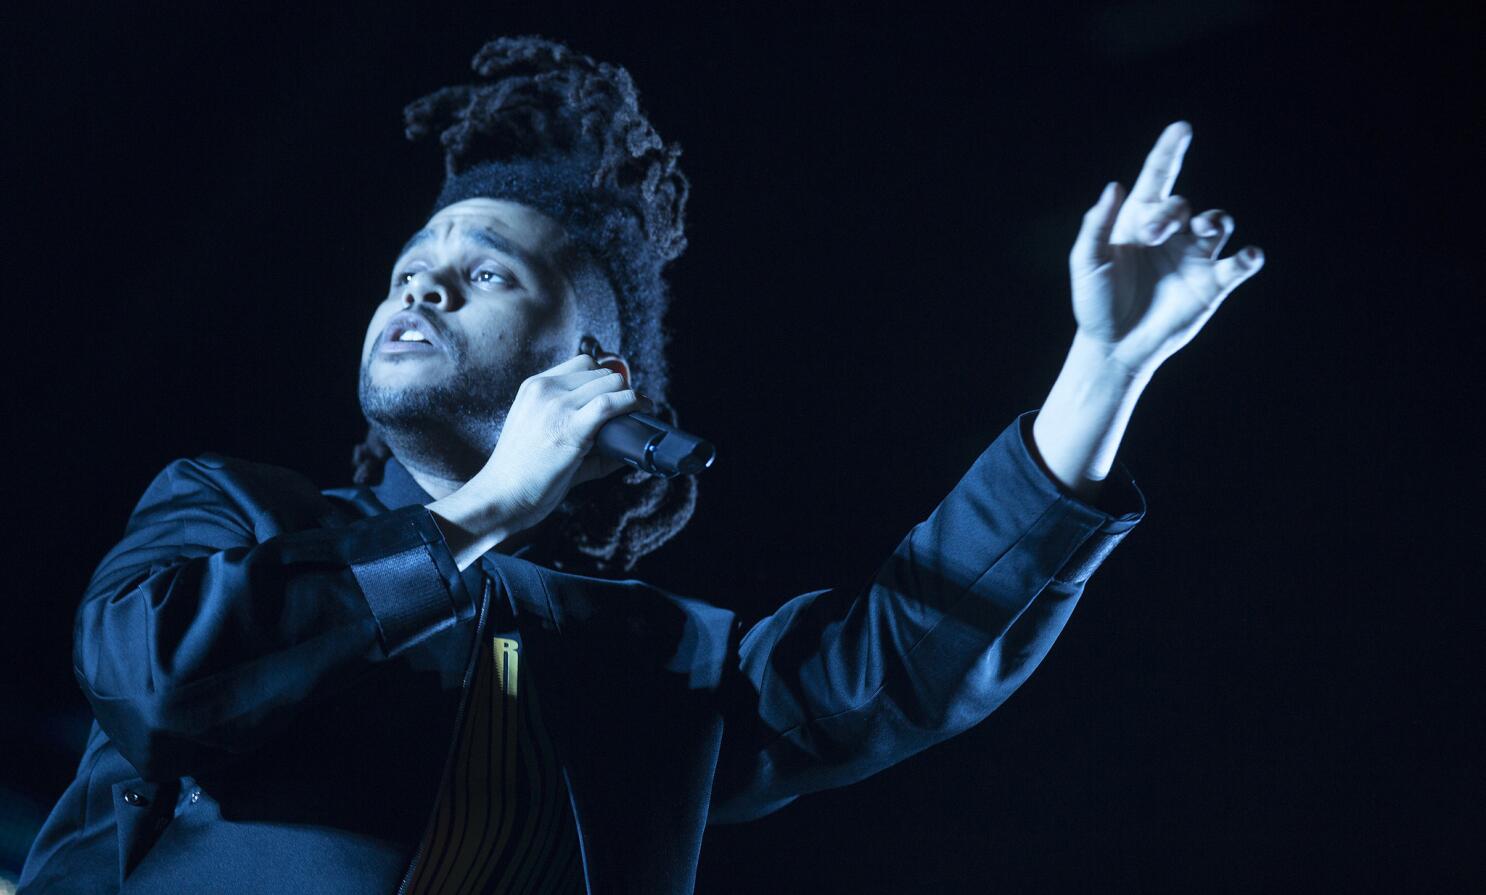 The Weeknd Shoots Music Video in Tiny Town for New Single Before Coachella